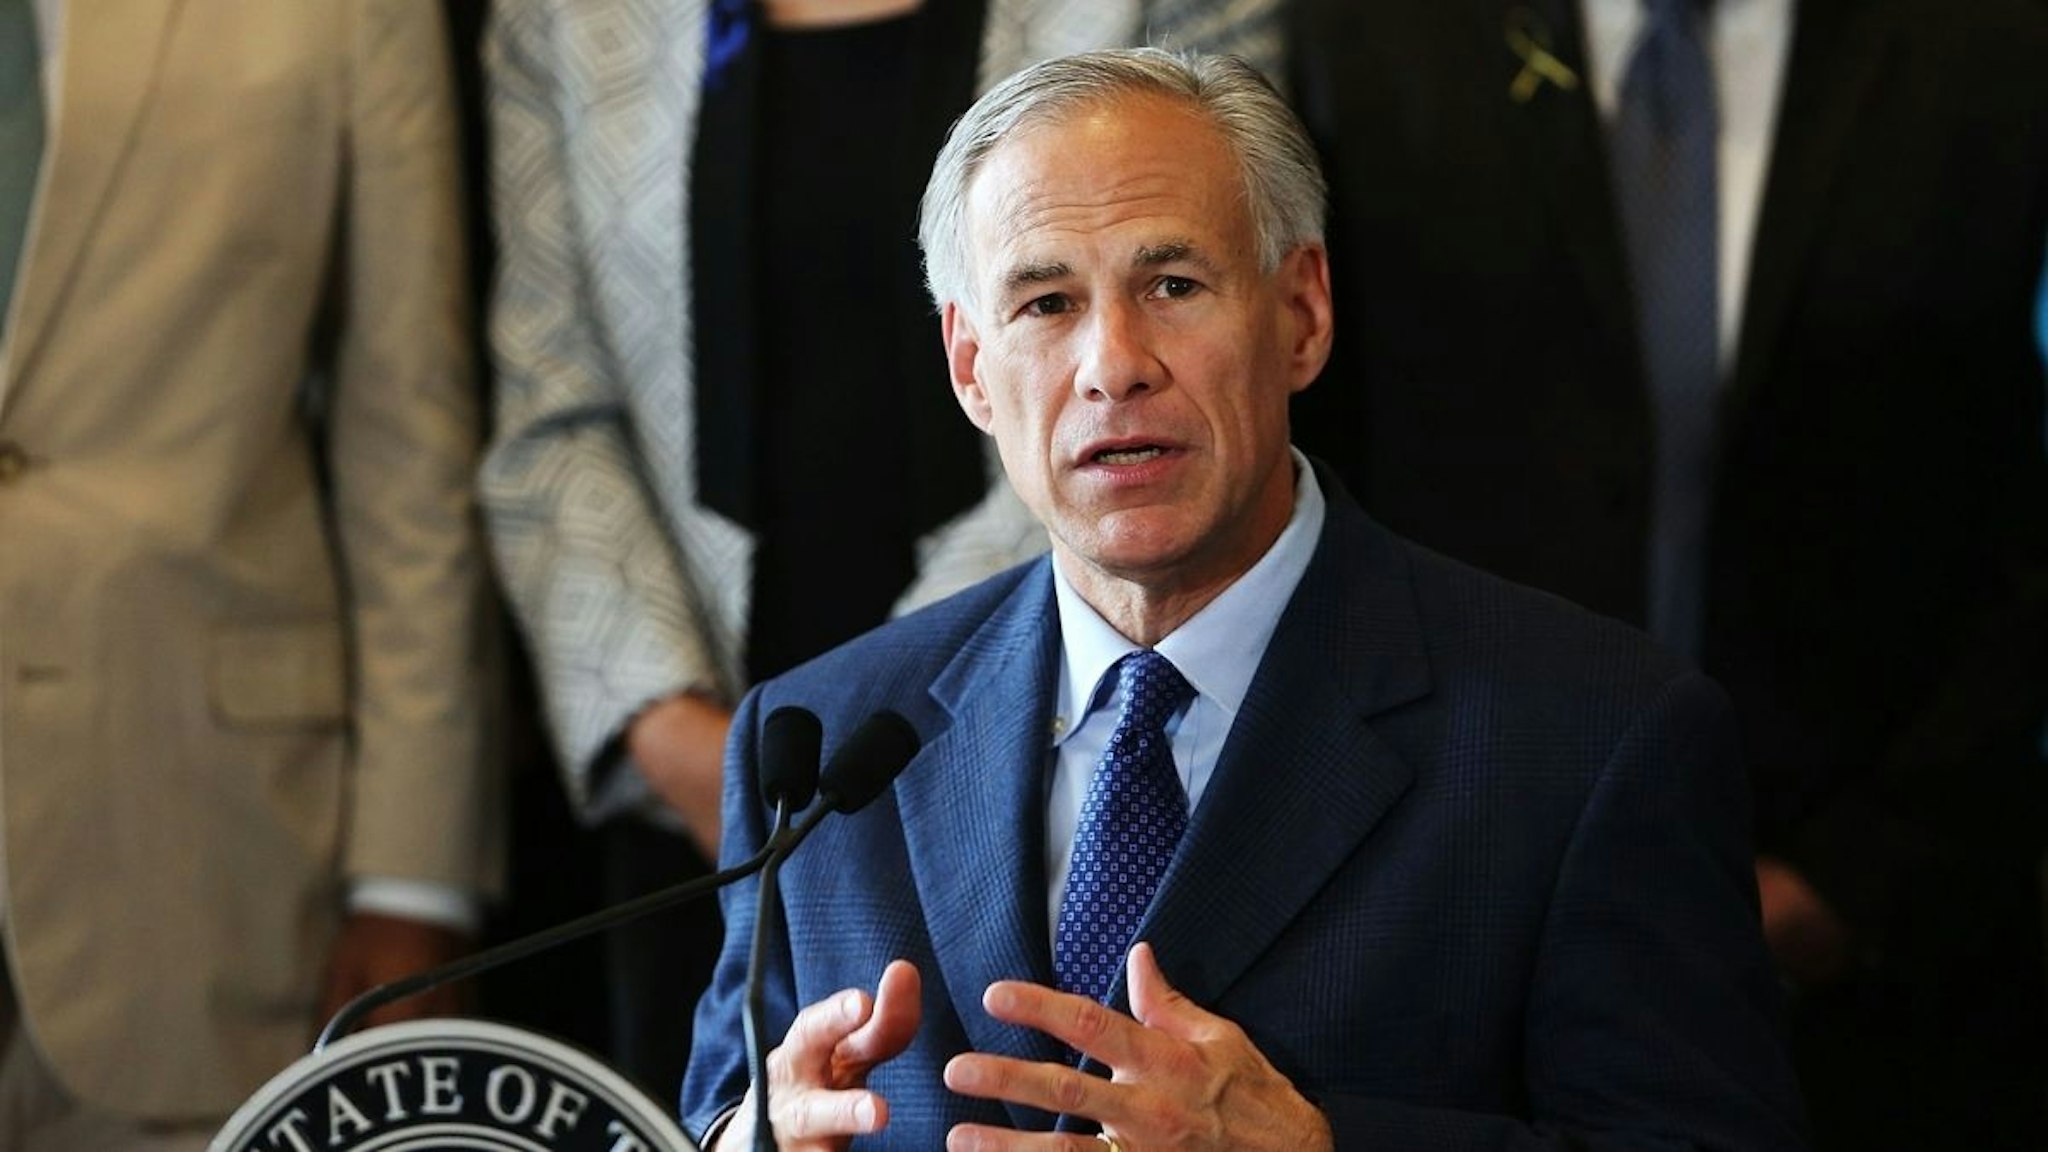 Texas Governor Greg Abbott speaks at Dallas's City Hall near the area that is still an active crime scene in downtown Dallas following the deaths of five police officers last night on July 8, 2016 in Dallas, Texas.